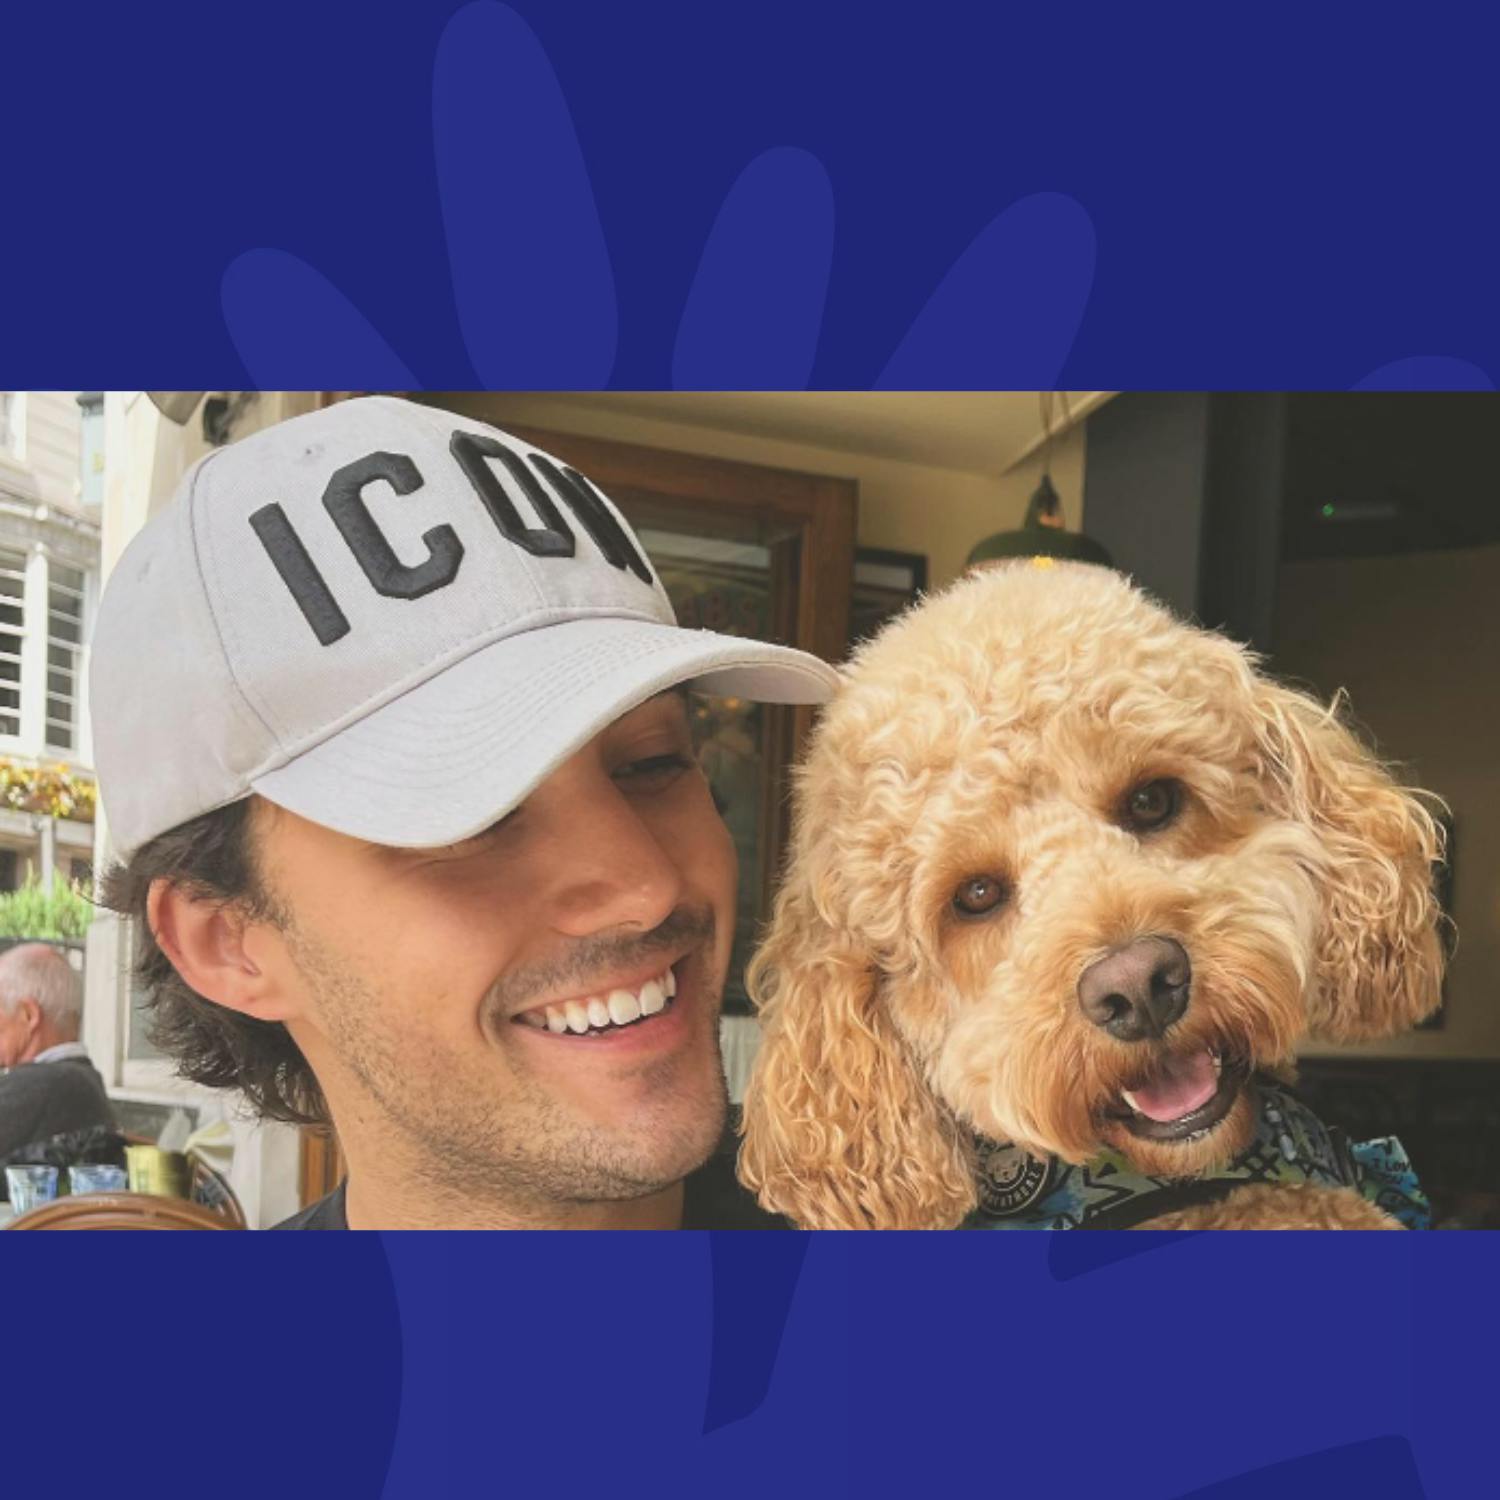 How This Adorable Cavapoo Stole Jake Carter's Heart